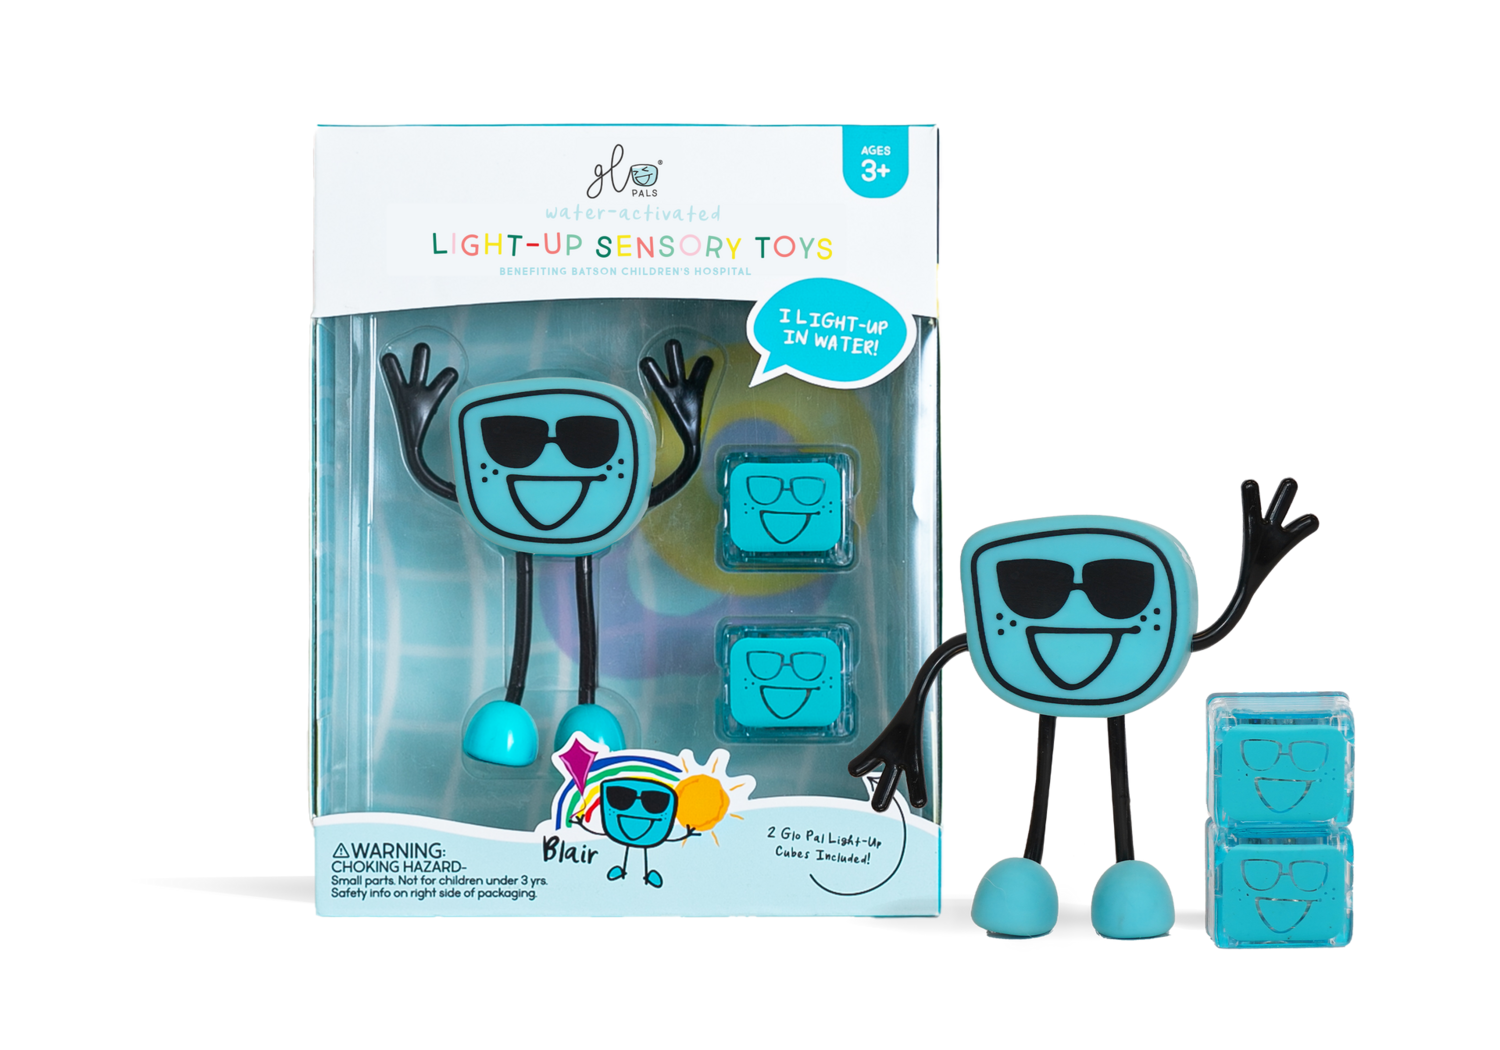 GLO PALS BLAIR CHARACTER W /2 LIGHT-UP CUBES